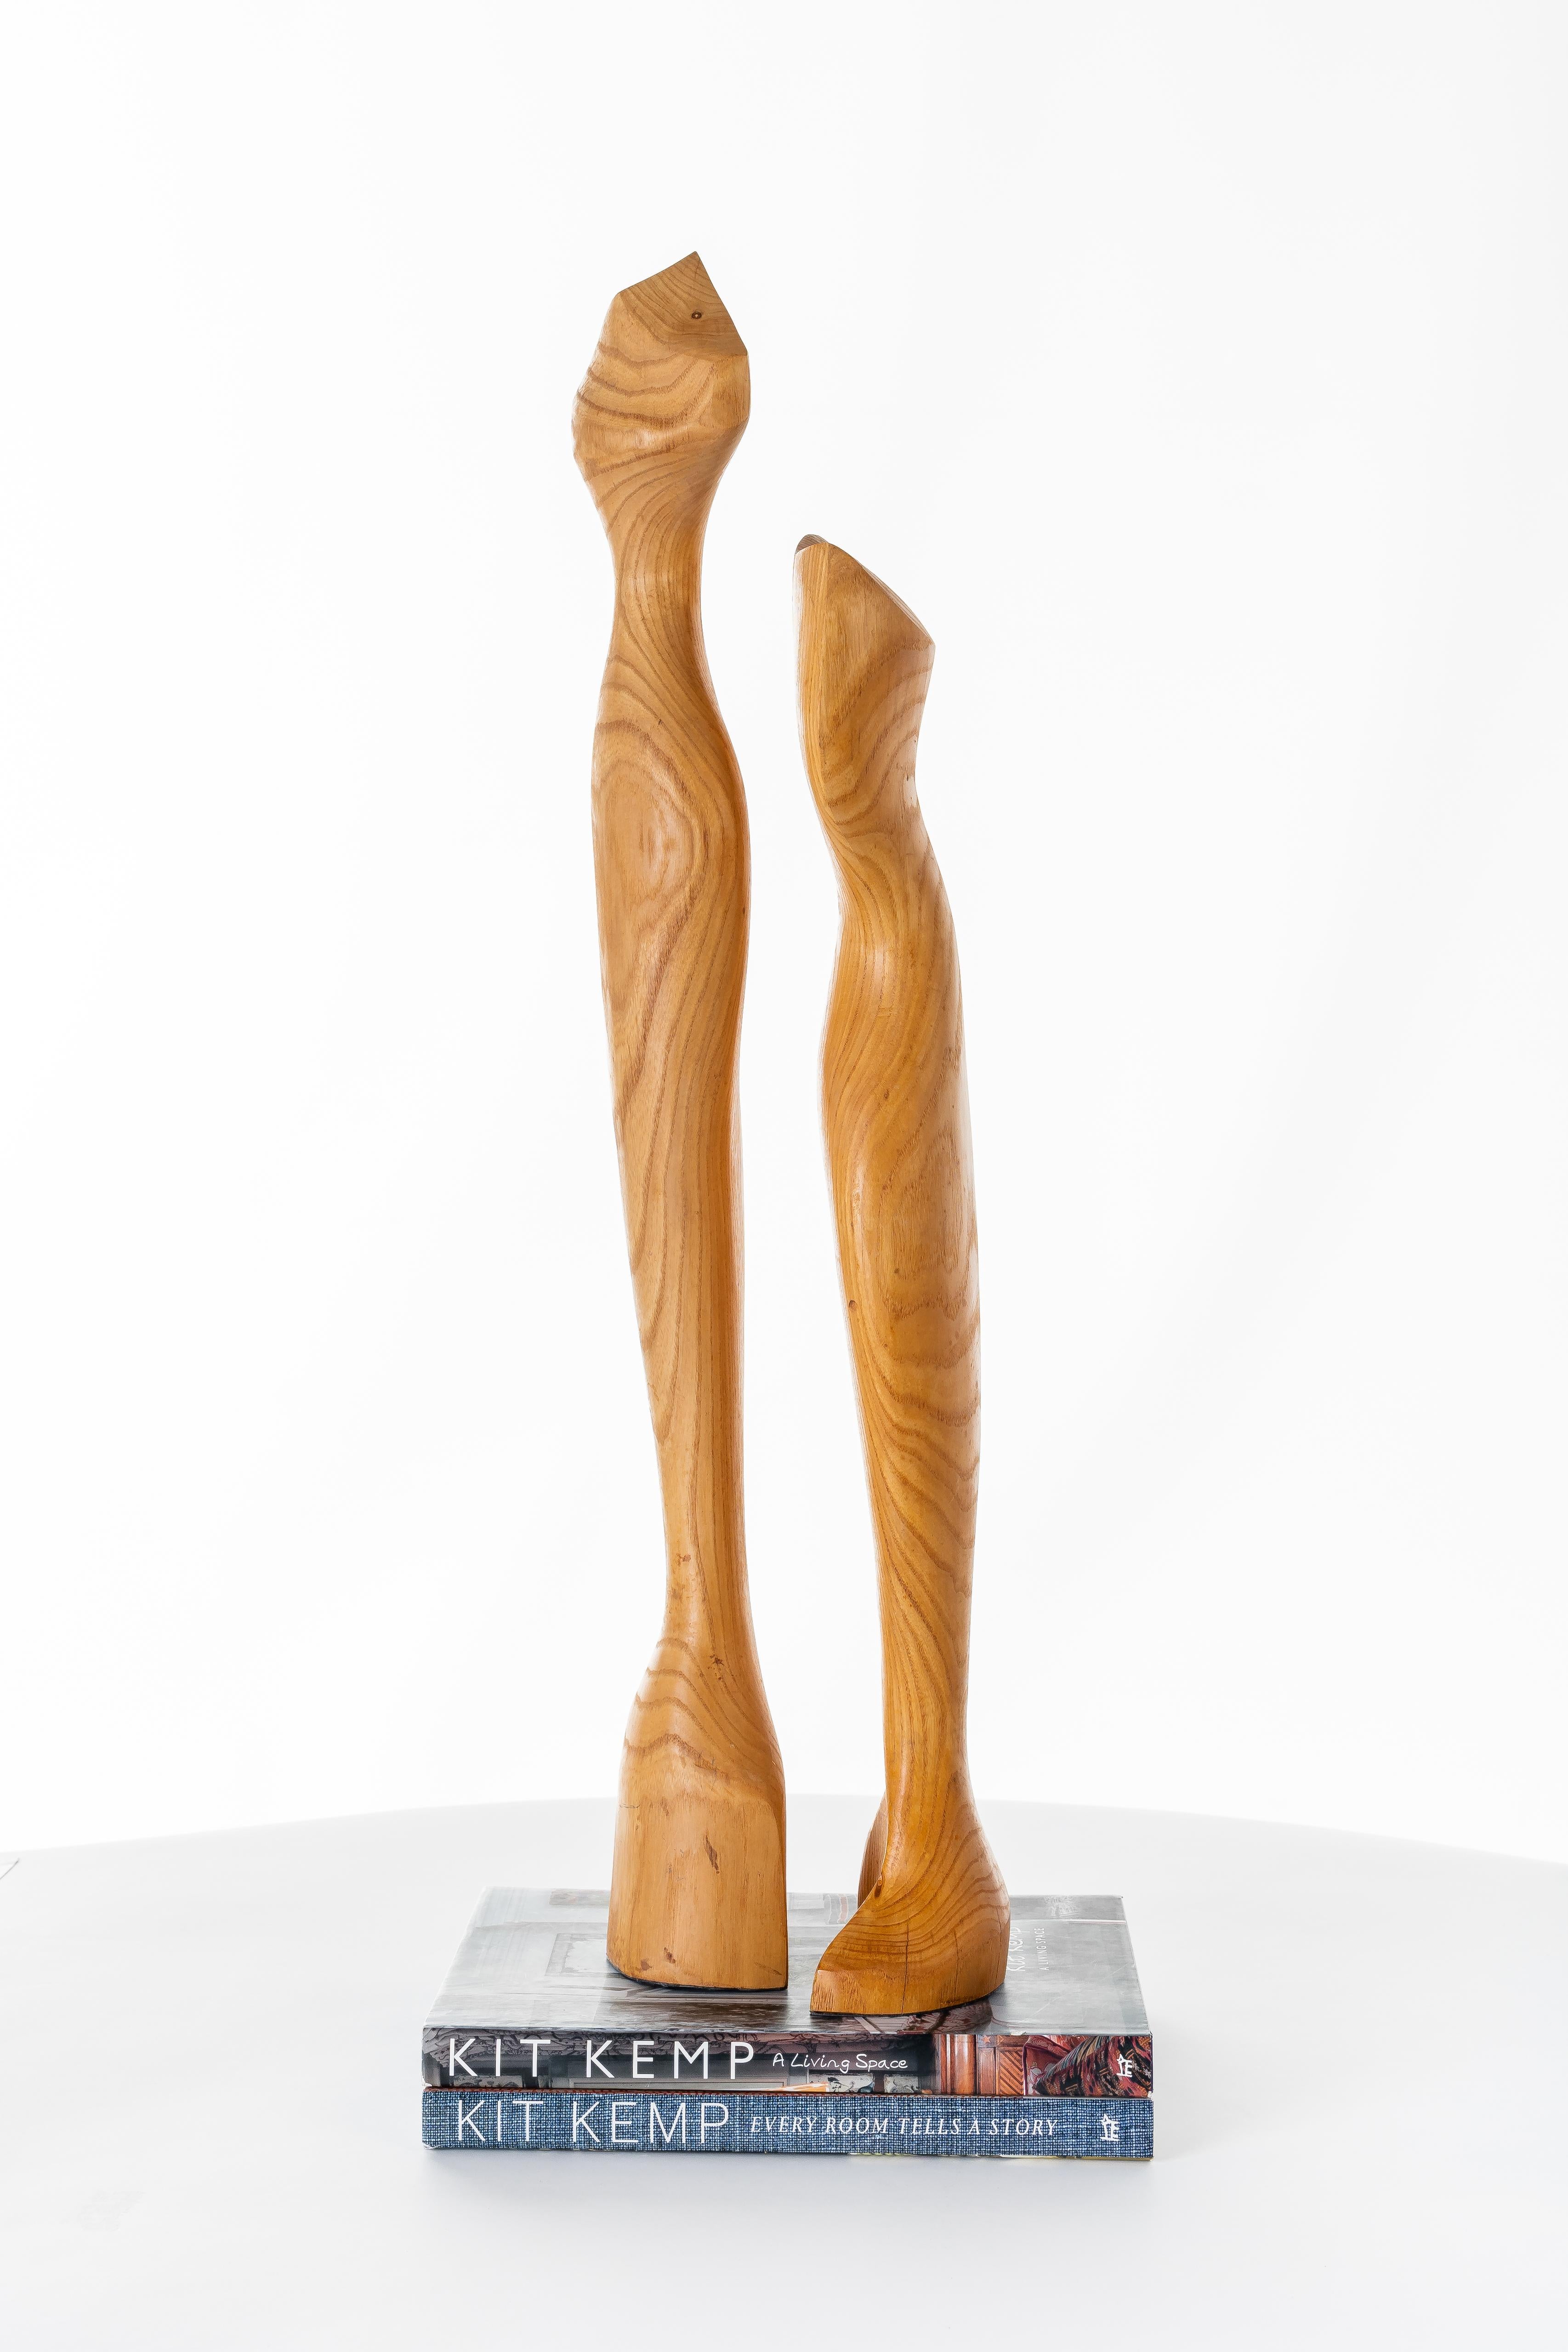 Pair of carved wooden sculptures, each offering a unique Silhouette accentuated by natural wood grain details.